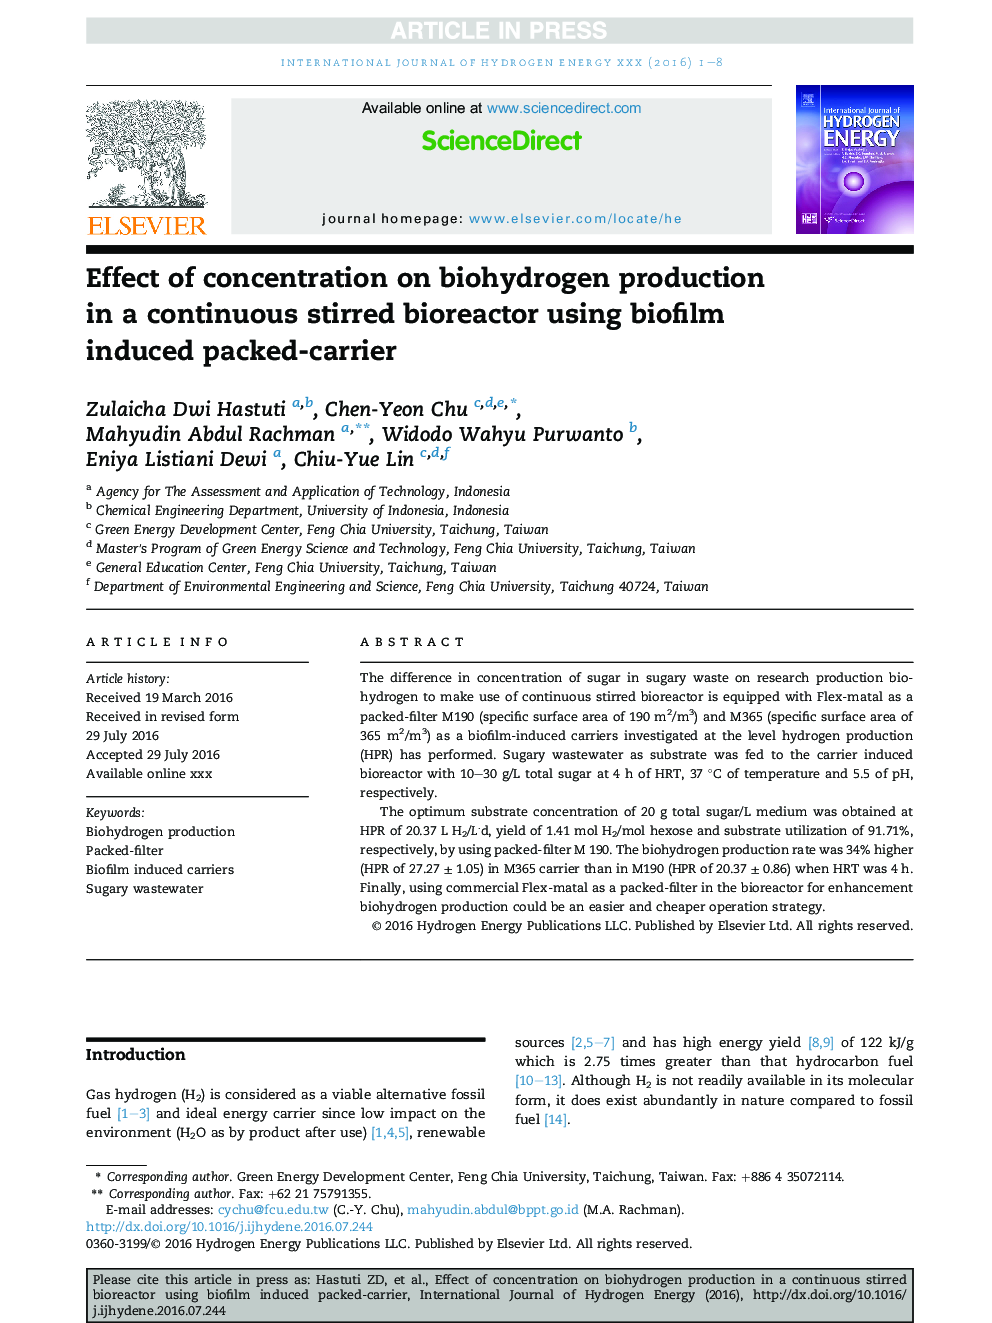 Effect of concentration on biohydrogen production in a continuous stirred bioreactor using biofilm induced packed-carrier